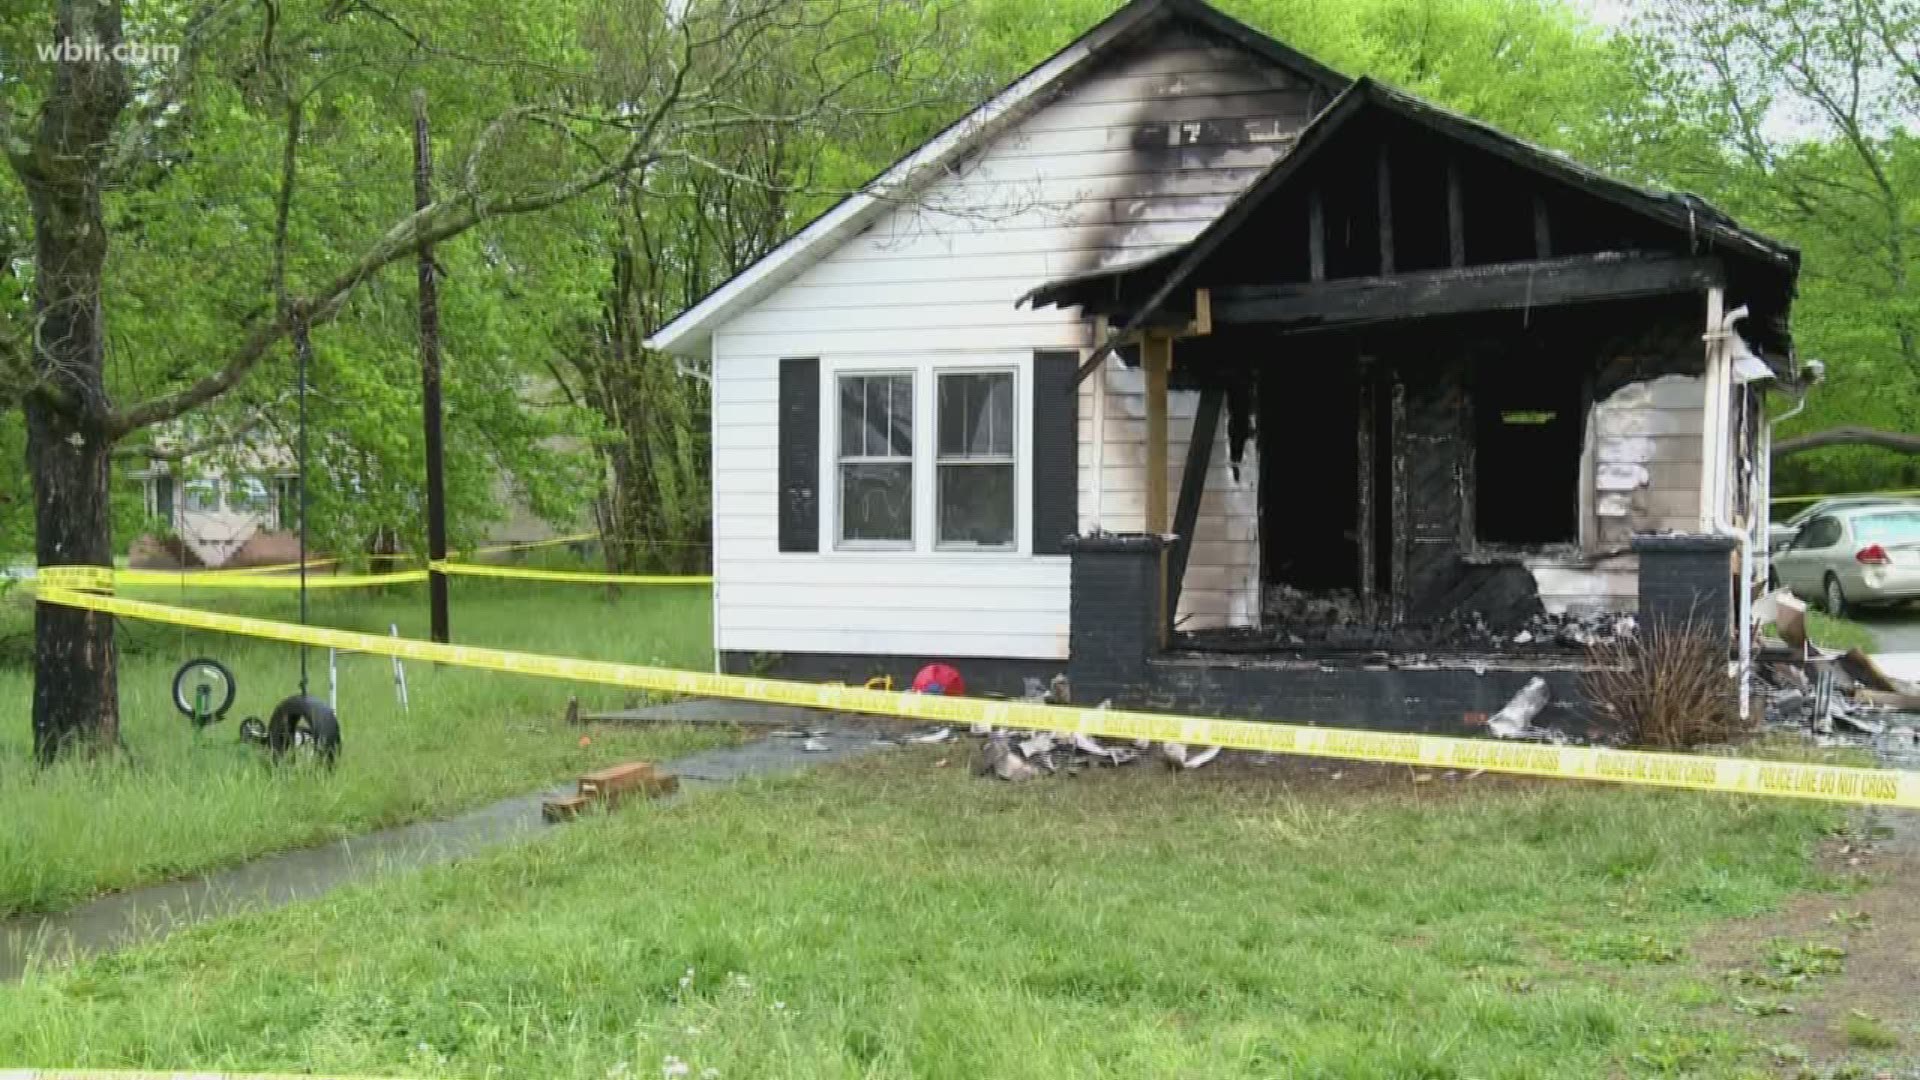 April 23, 2018: Alcoa Police continue to look for answers after a Sunday morning fire killed four adults and two children.